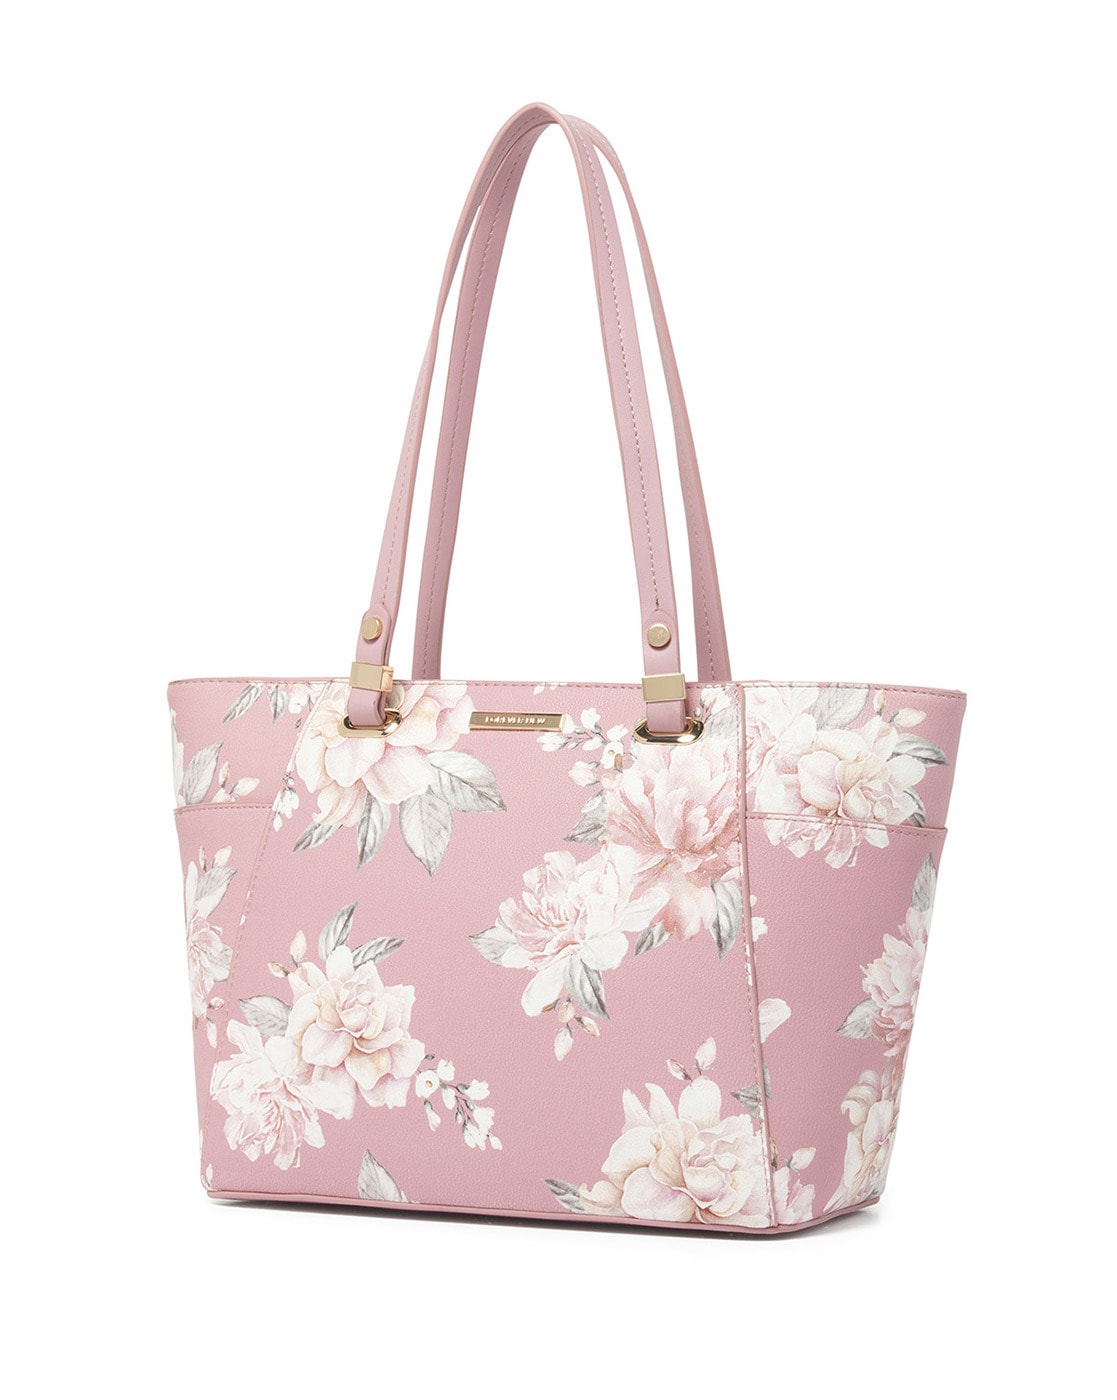 Forever New Sophie Tote Bag  Pink Buy Forever New Sophie Tote Bag  Pink  Online at Best Price in India  Nykaa